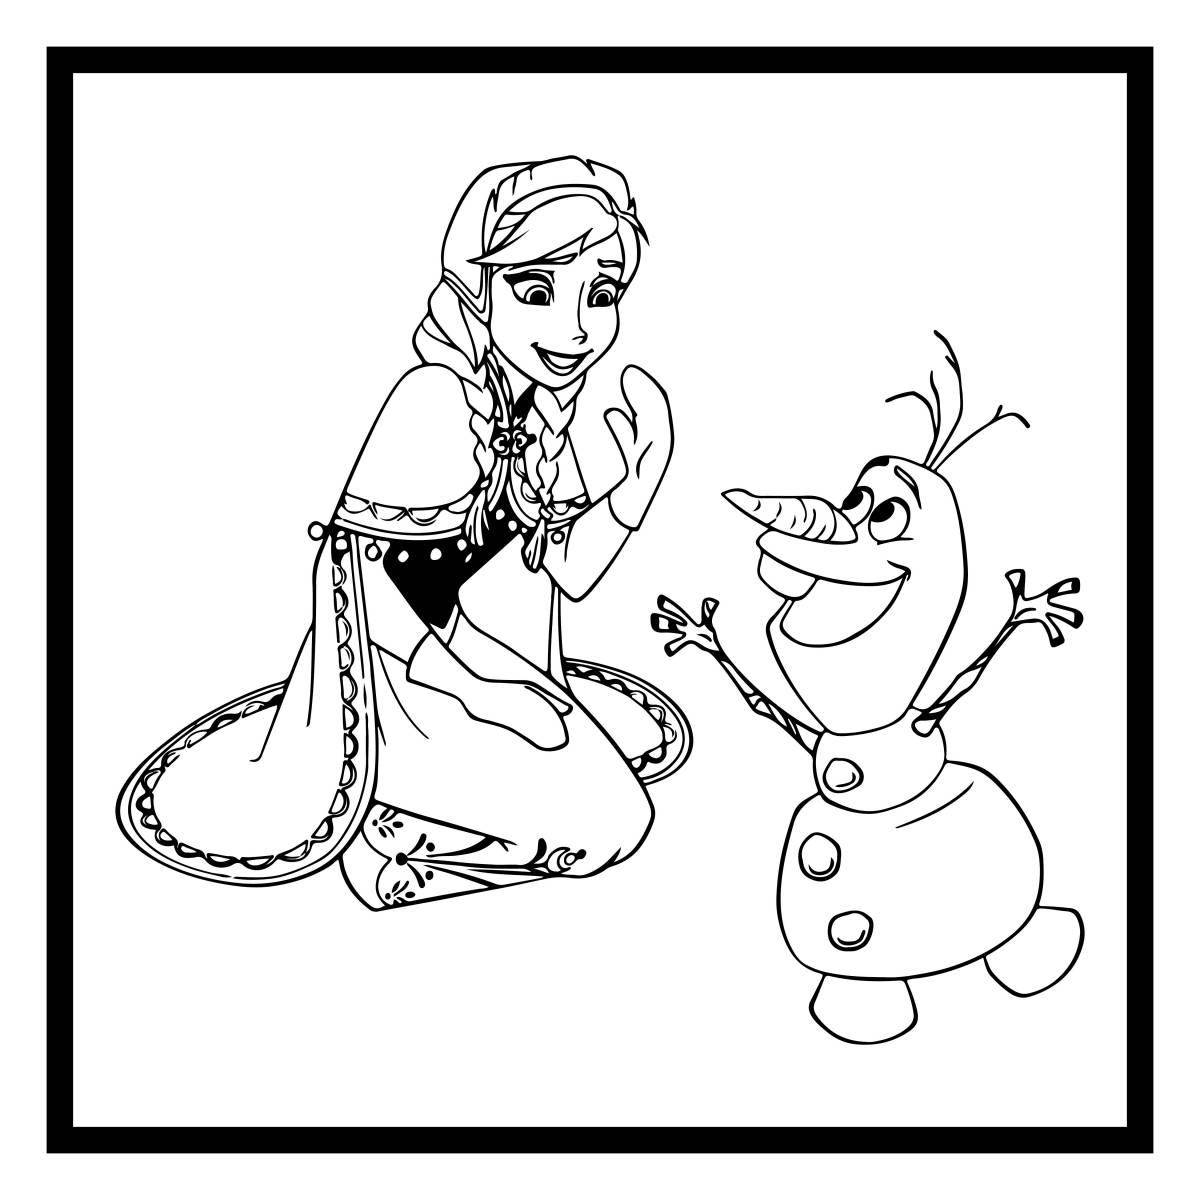 Elsa and olaf awesome coloring book